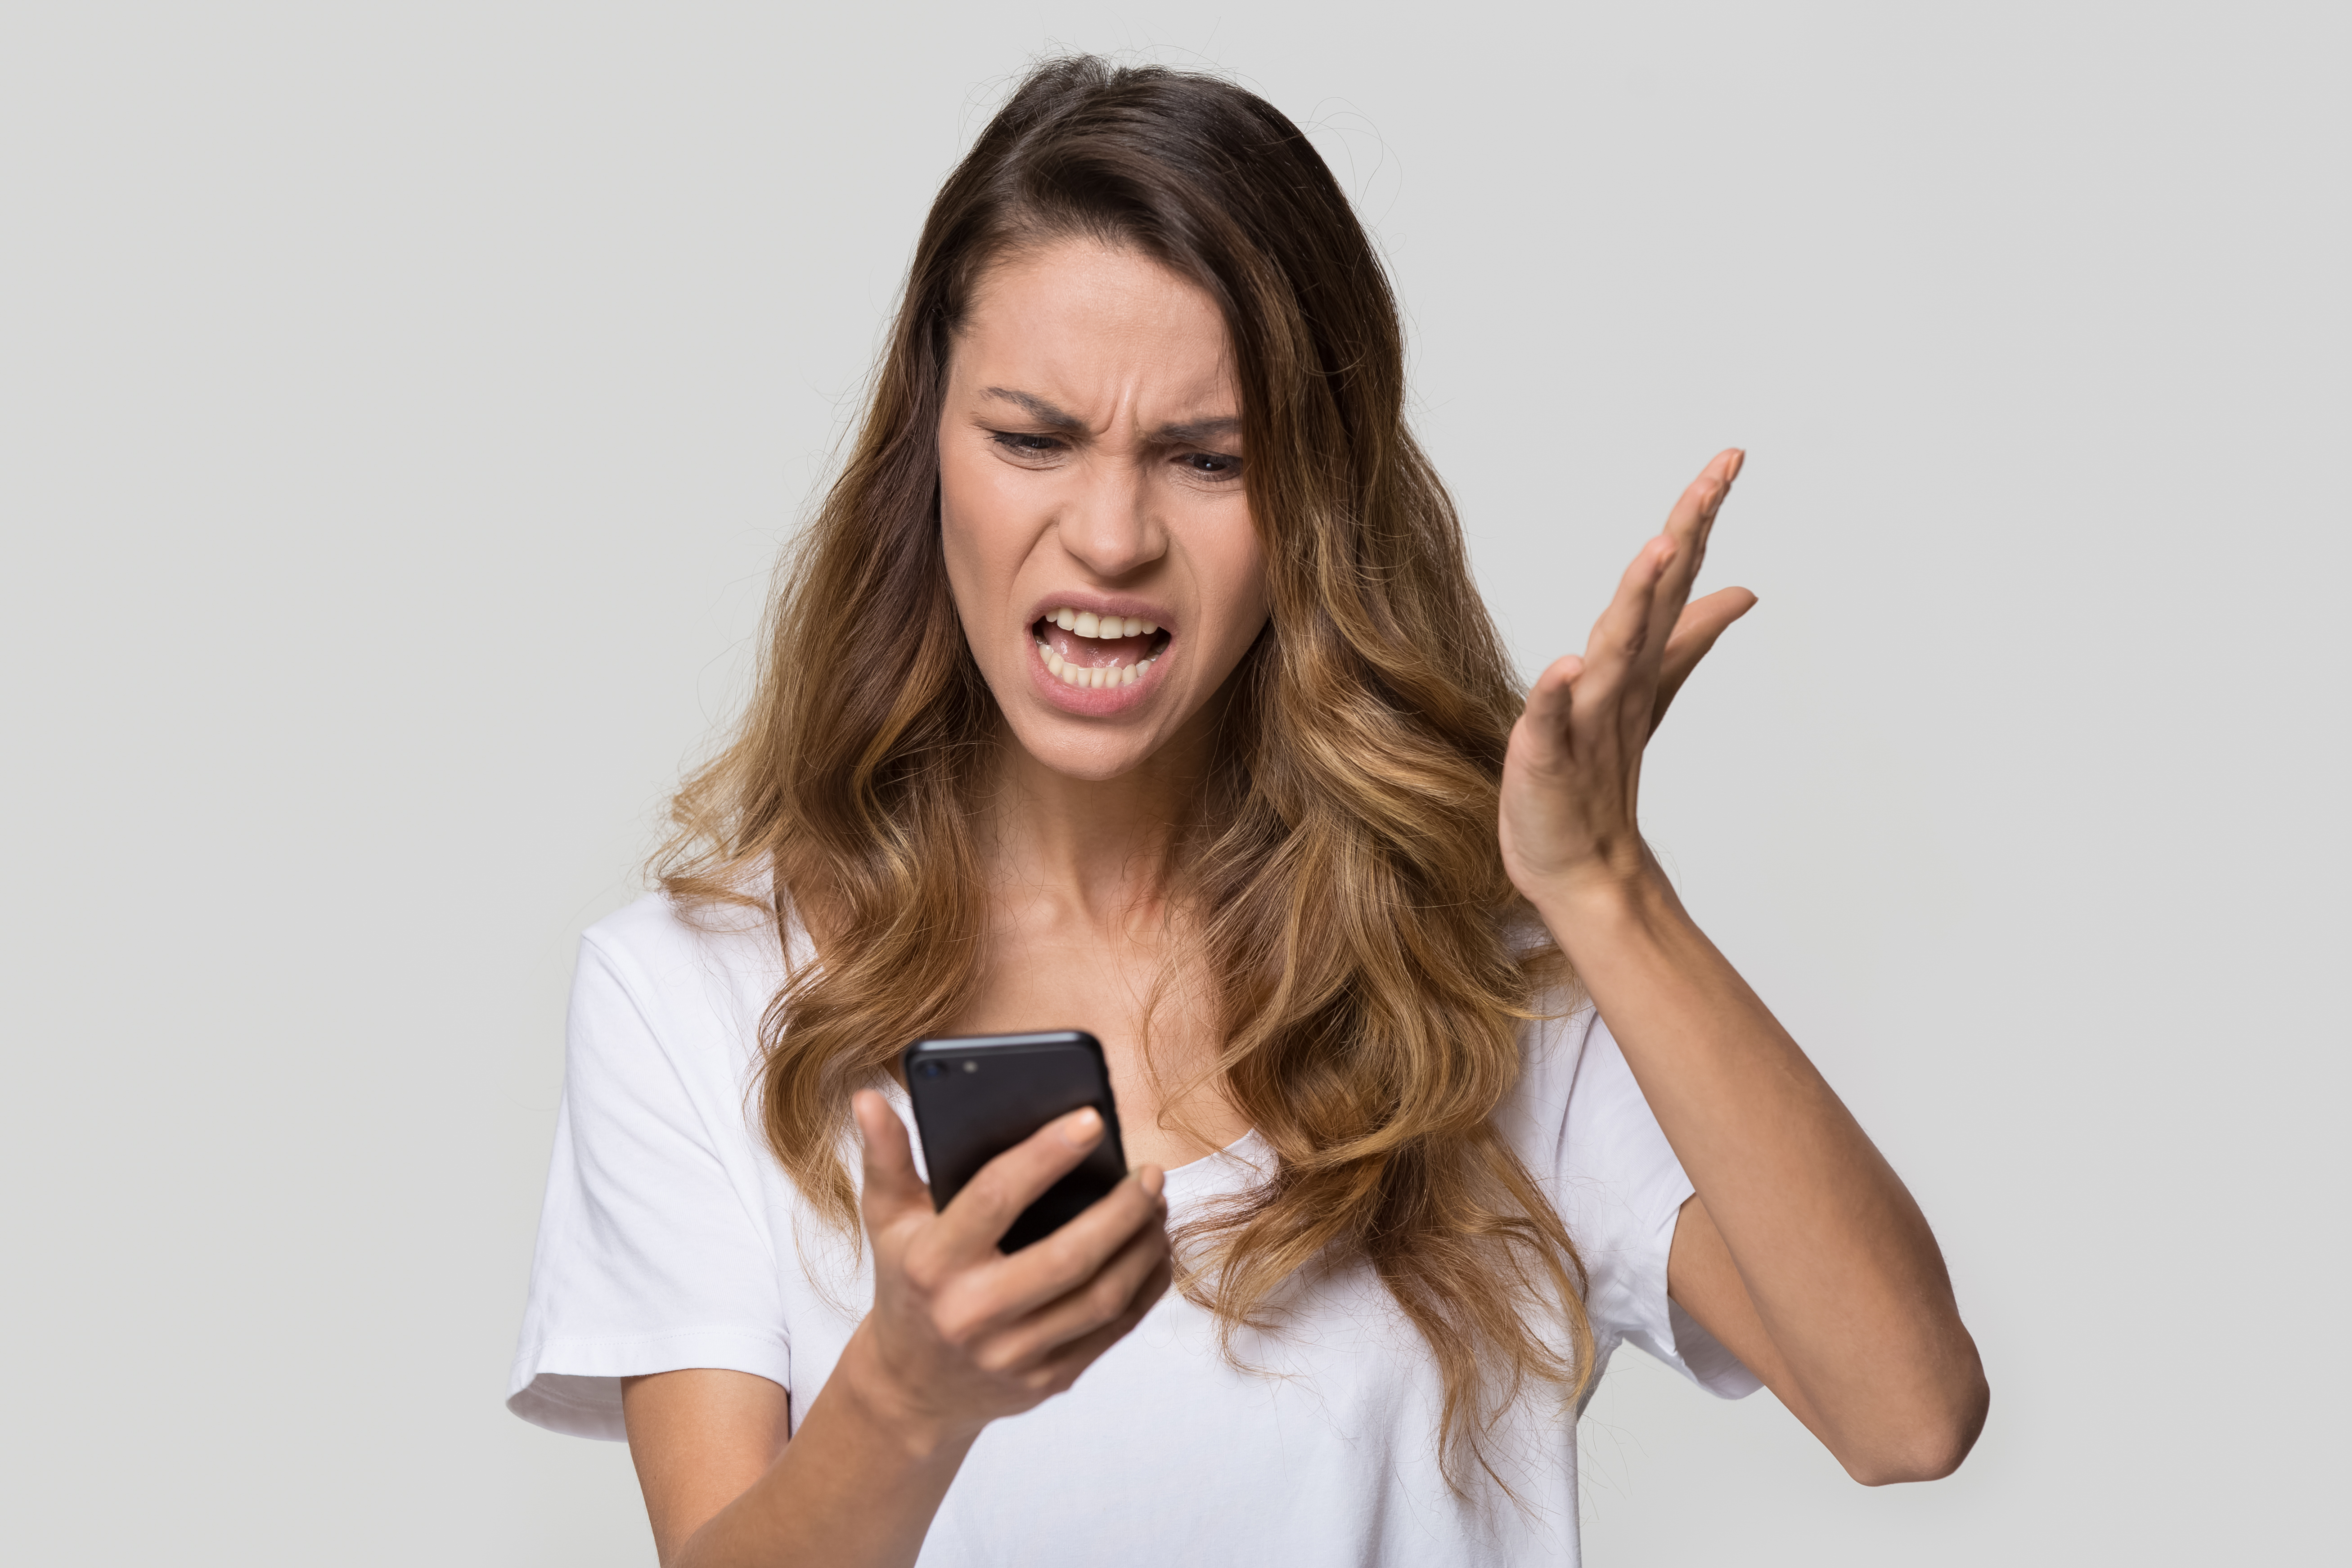 An angry woman looking at her phone | Source: Shutterstock